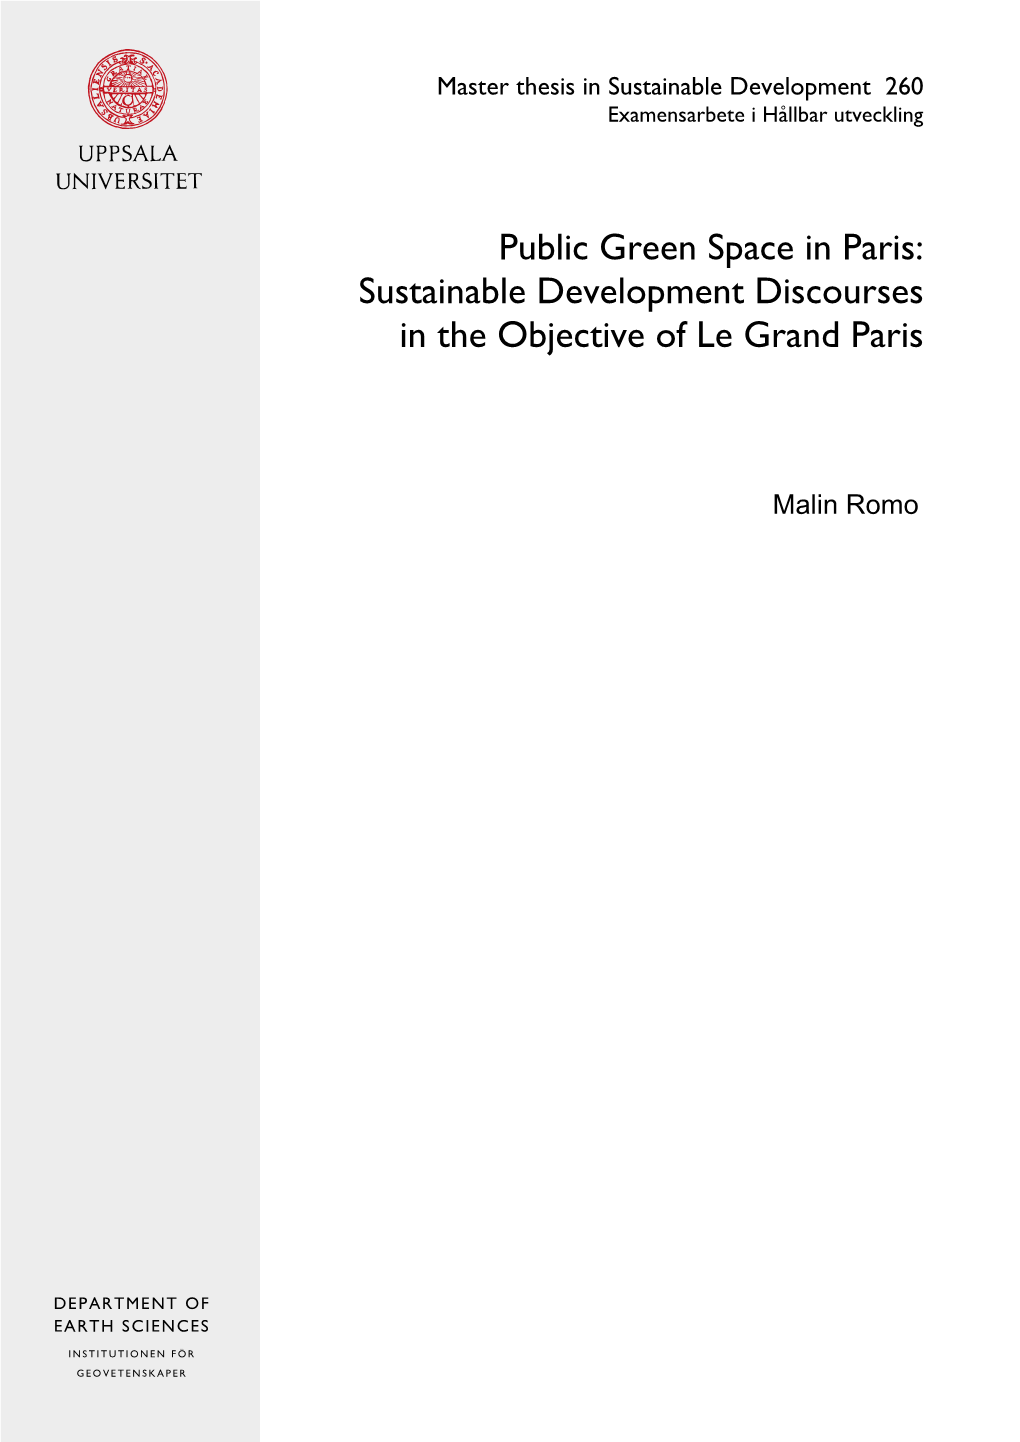 Public Green Space in Paris: Sustainable Development Discourses in the Objective of Le Grand Paris